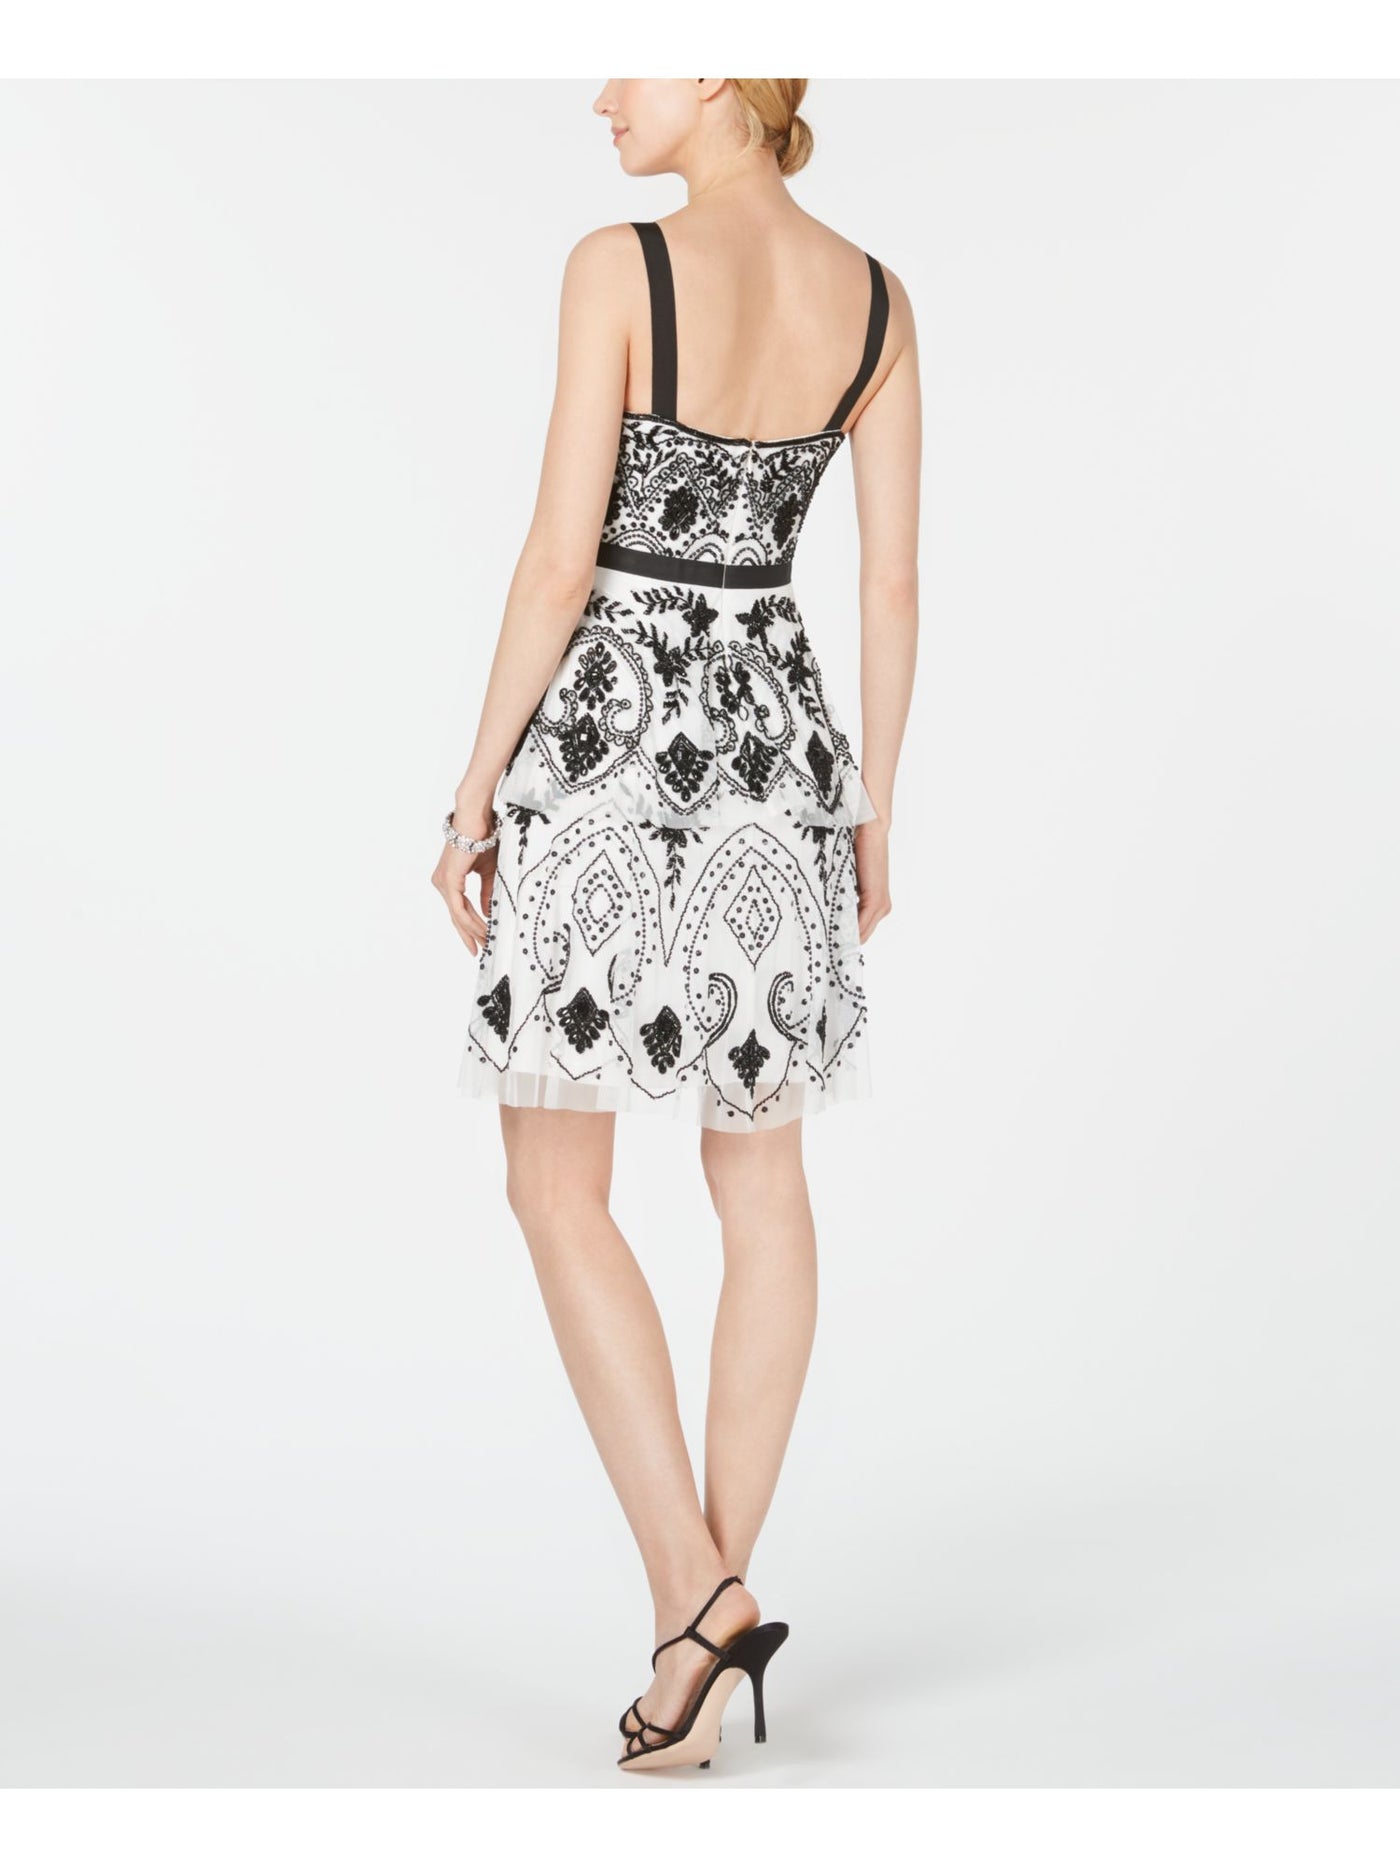 ADRIANNA PAPELL Womens Ivory Beaded Sleeveless Scoop Neck Above The Knee Cocktail A-Line Dress 10